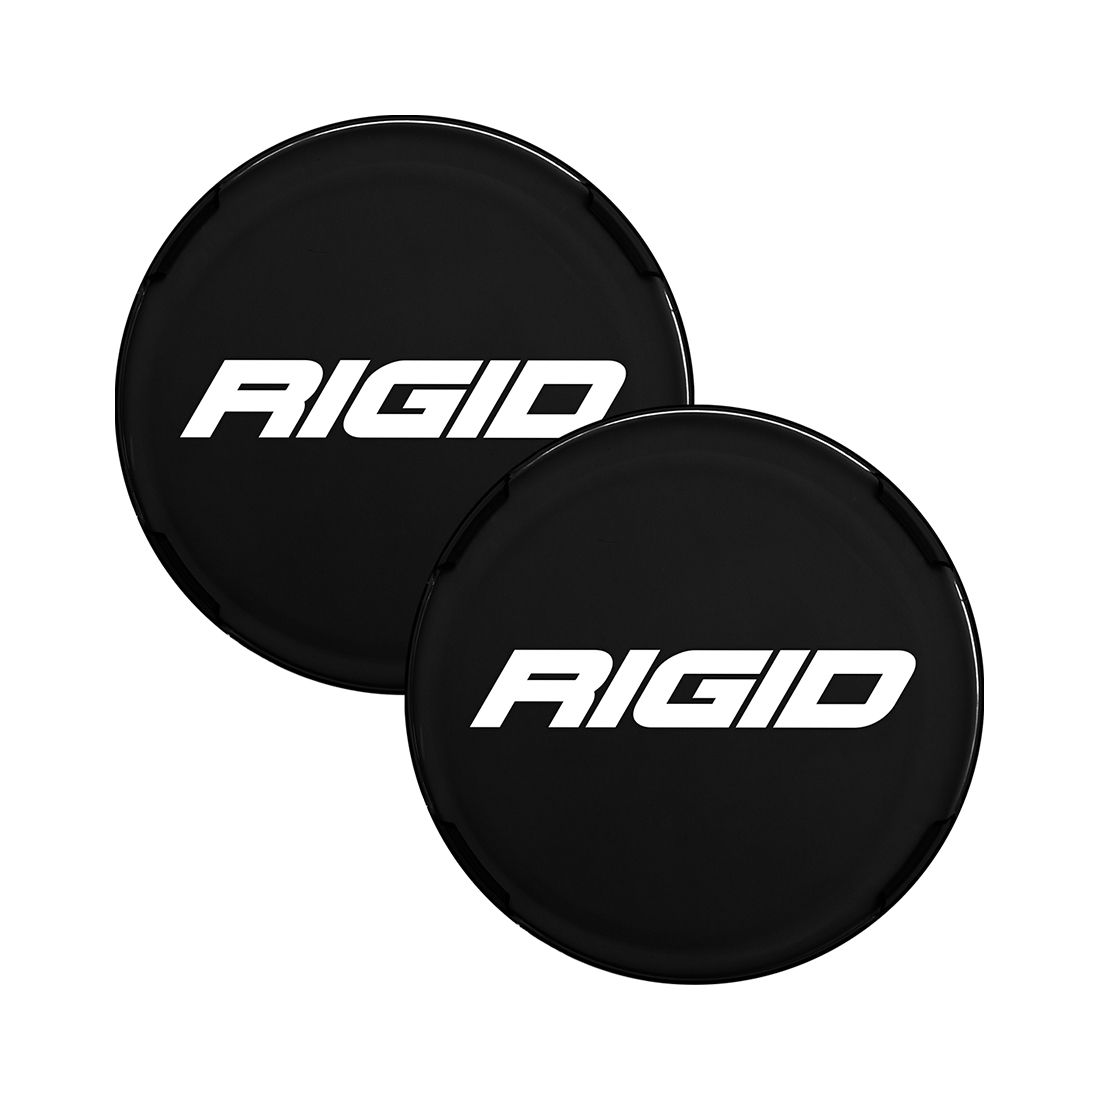 Rigid 360-Series 6" (Round) / Light Covers (Sold in PAIRS) - 363661, 363662, 363664, 363665